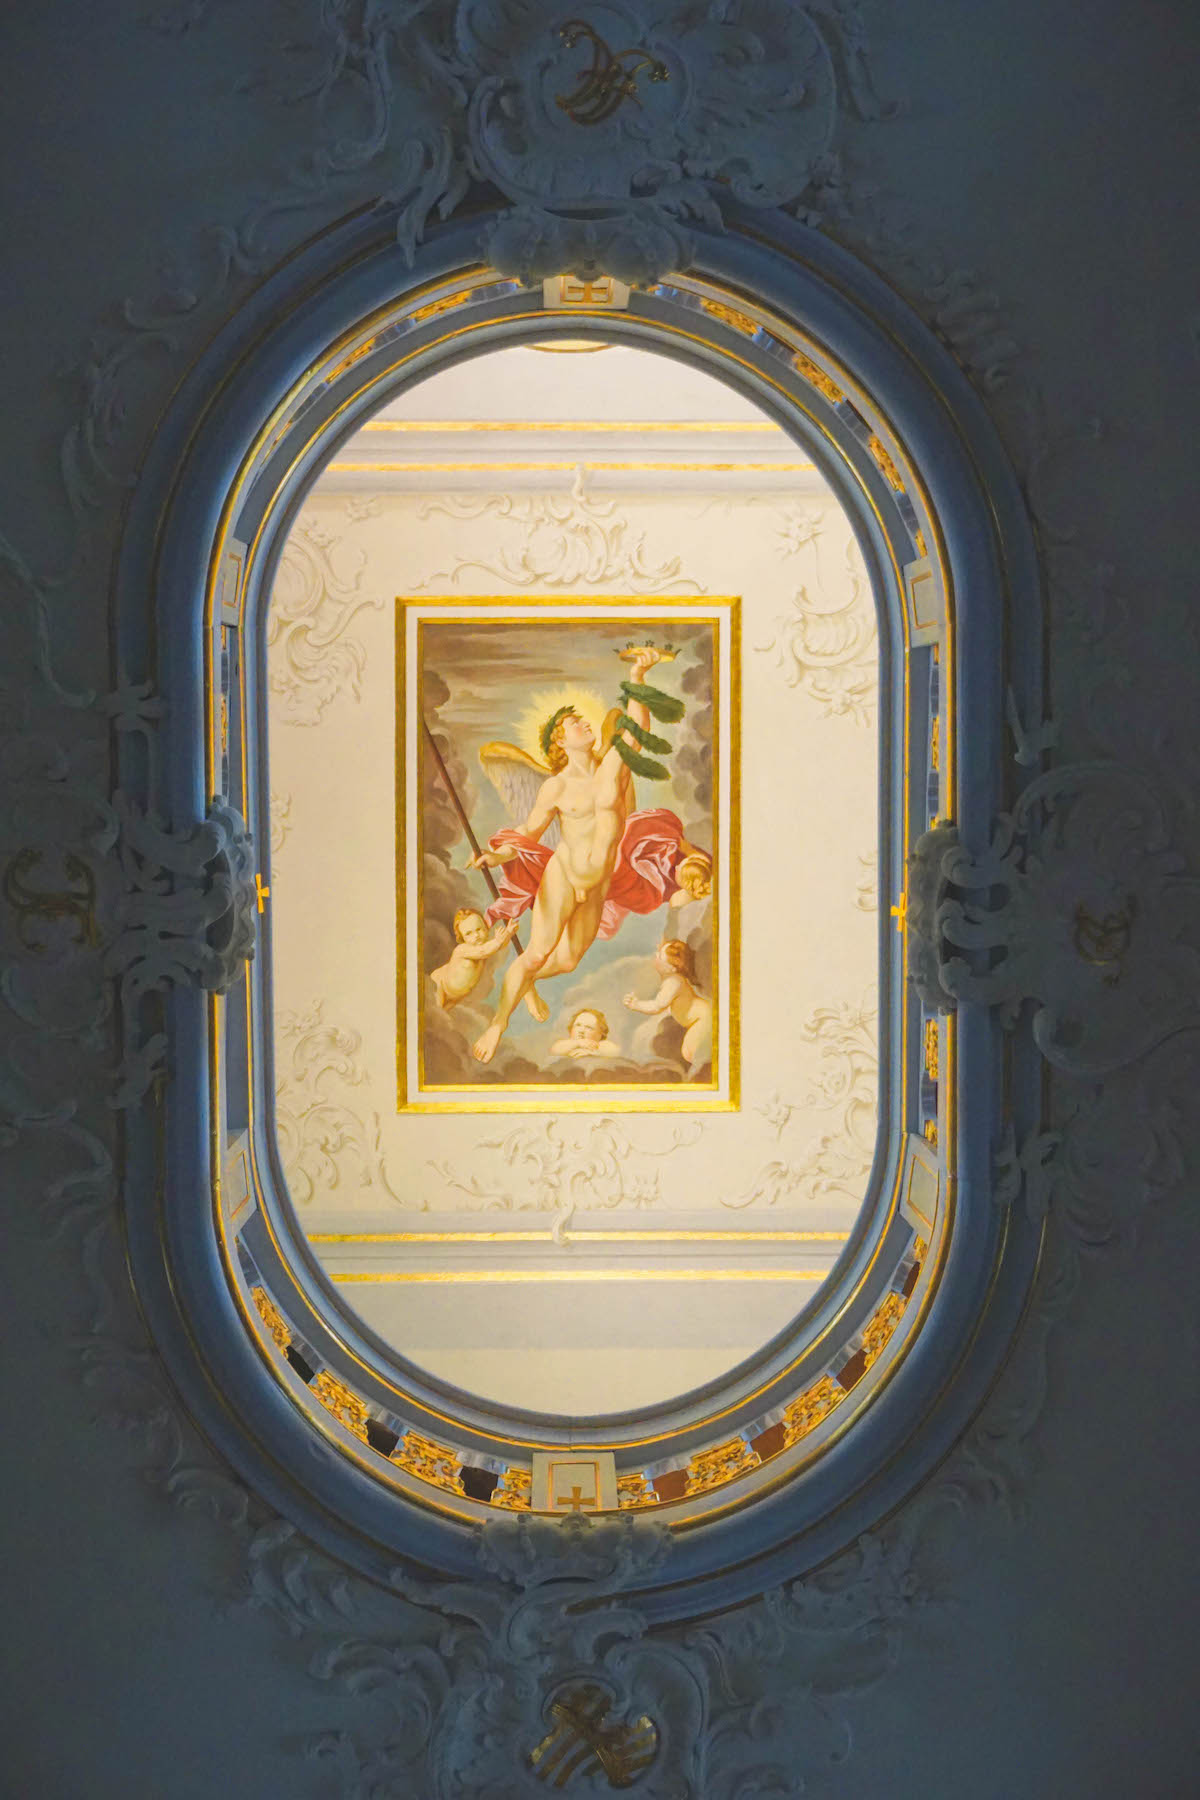 The ceiling painting in the Anna Amalia Library